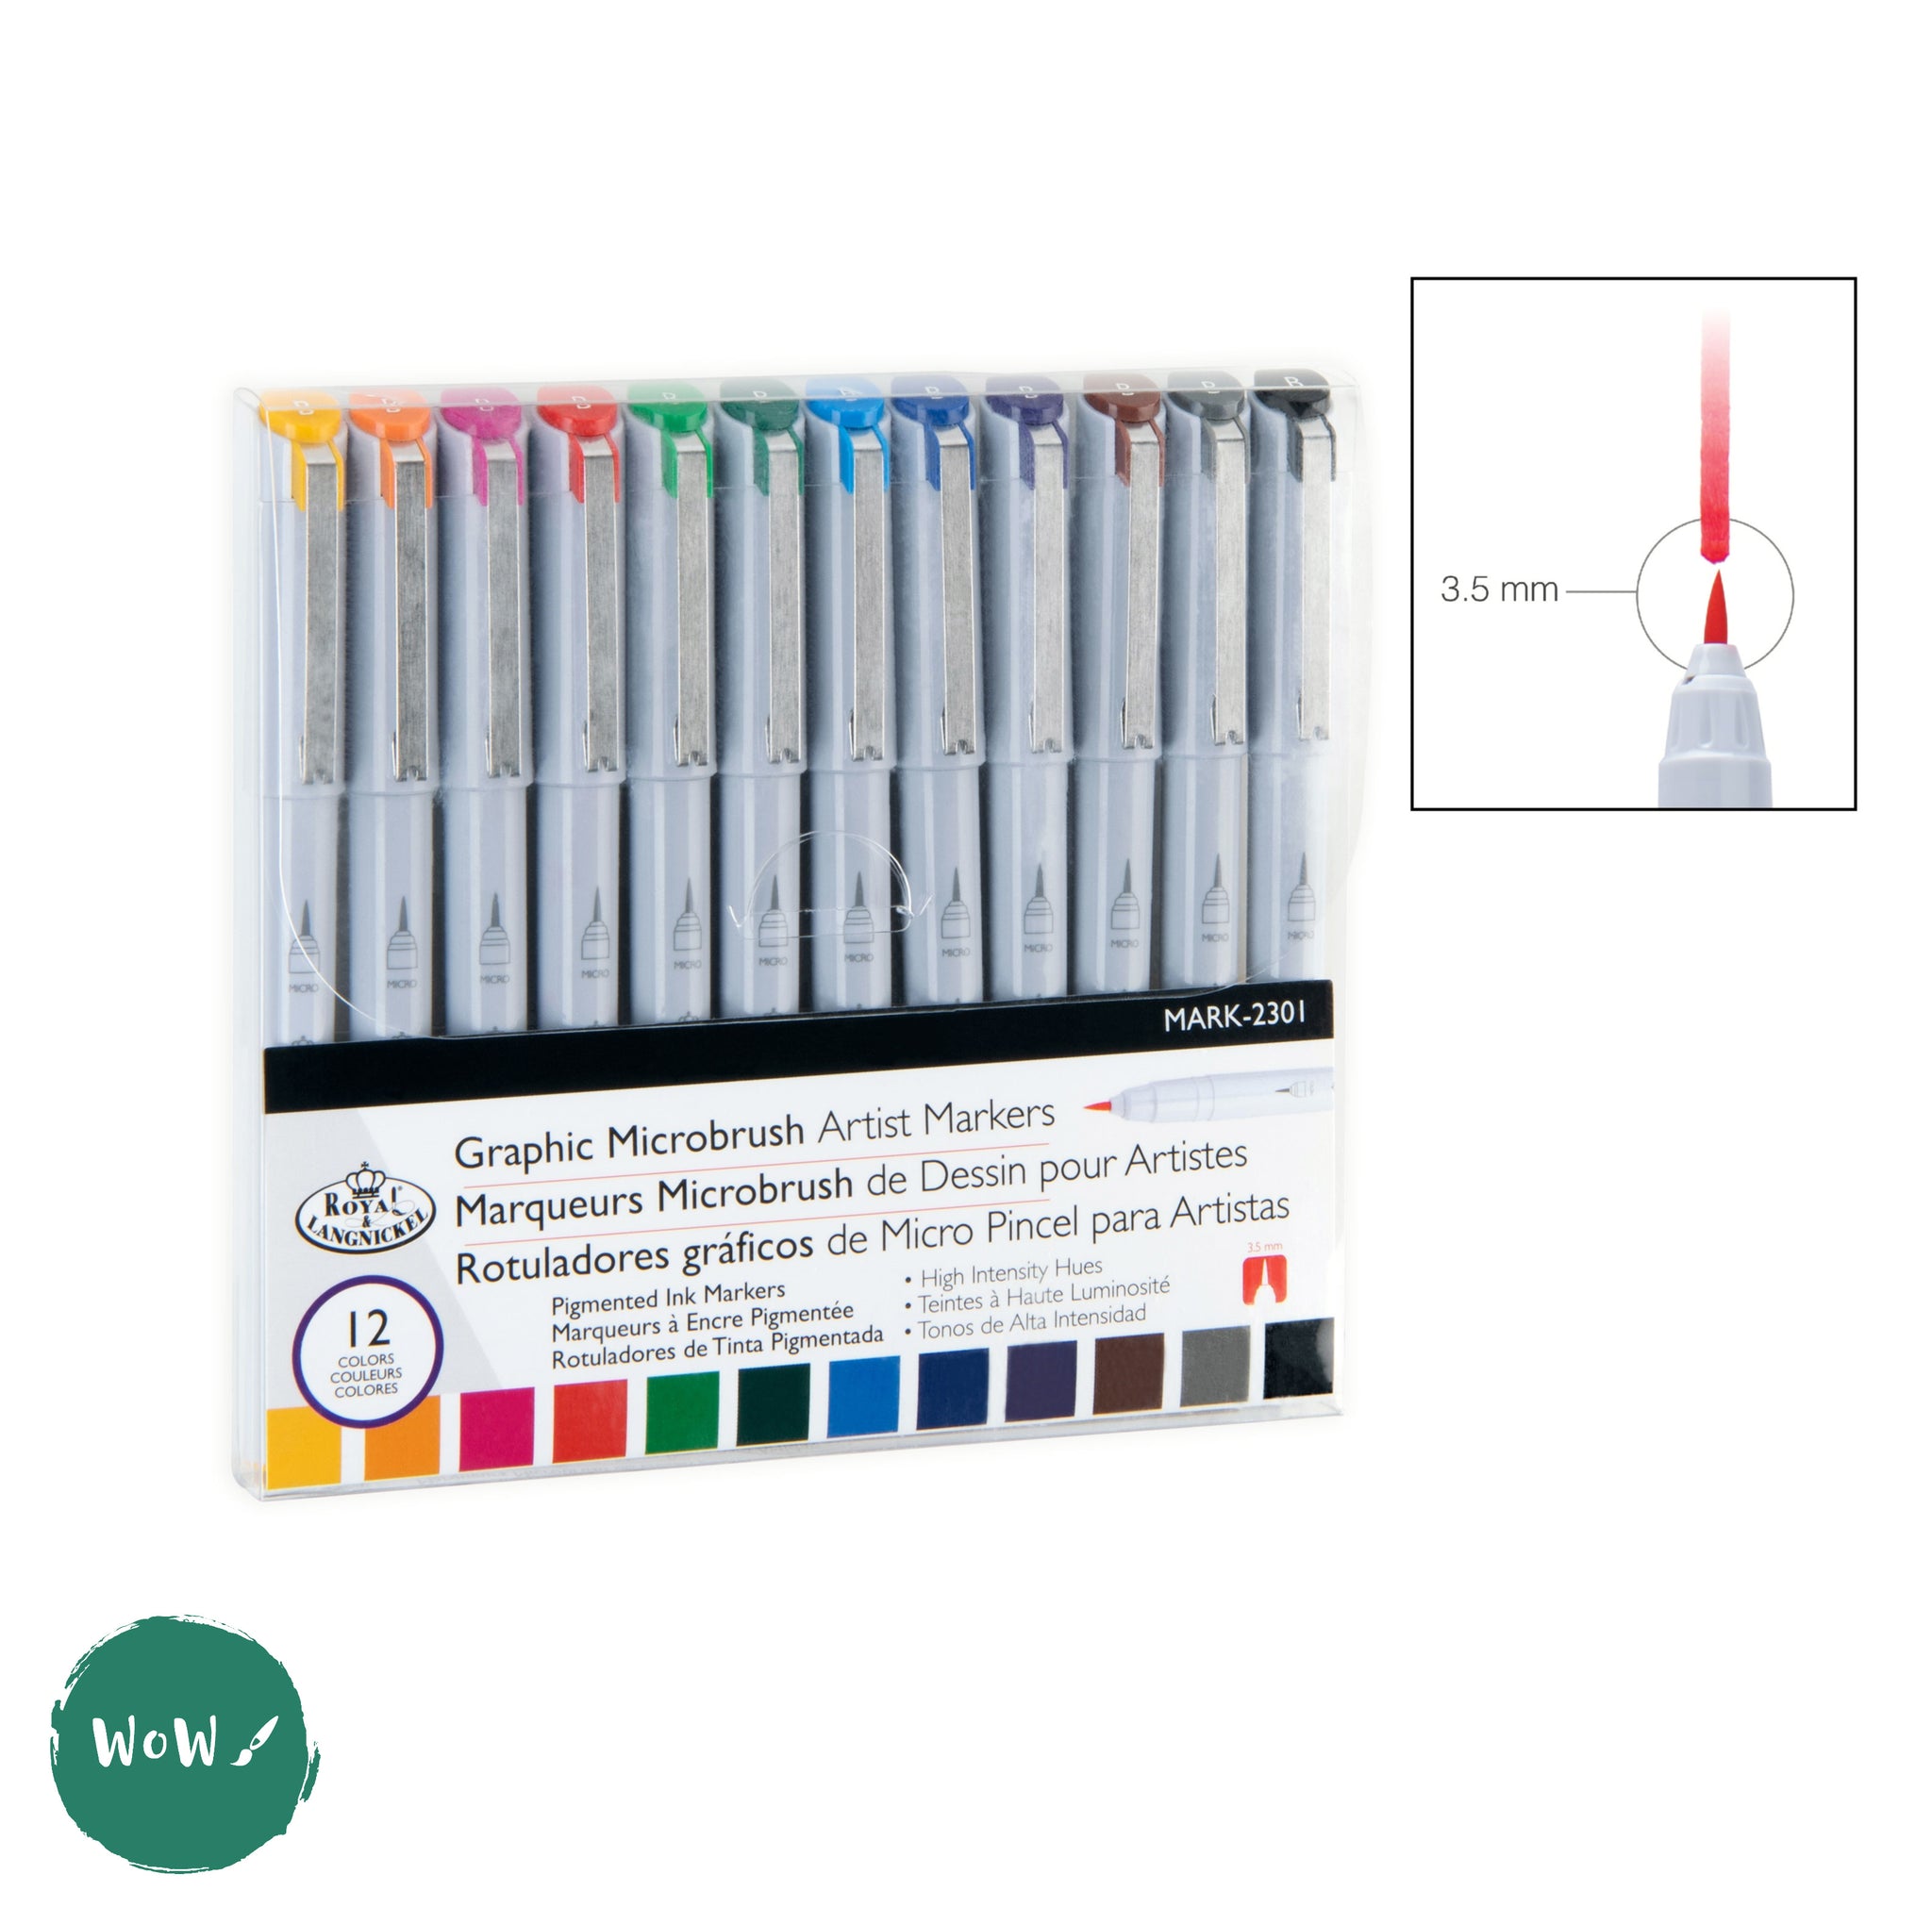 Royal & Langnickel - 12pc Fineliner Artist Markers with Case